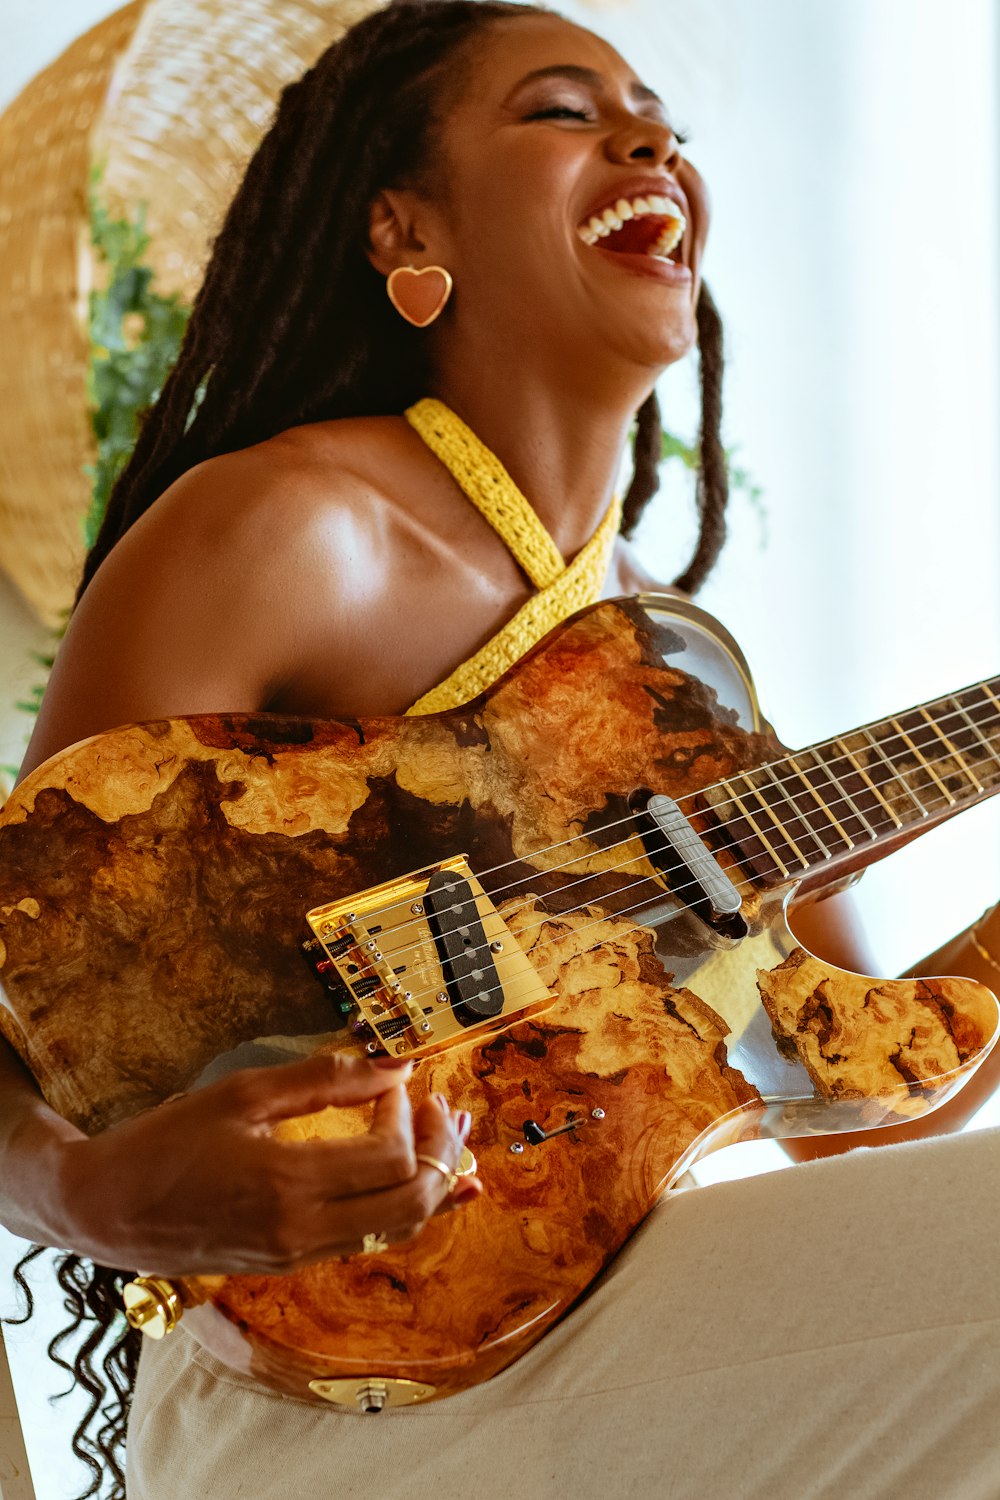 a woman with dreadlocks playing a guitar